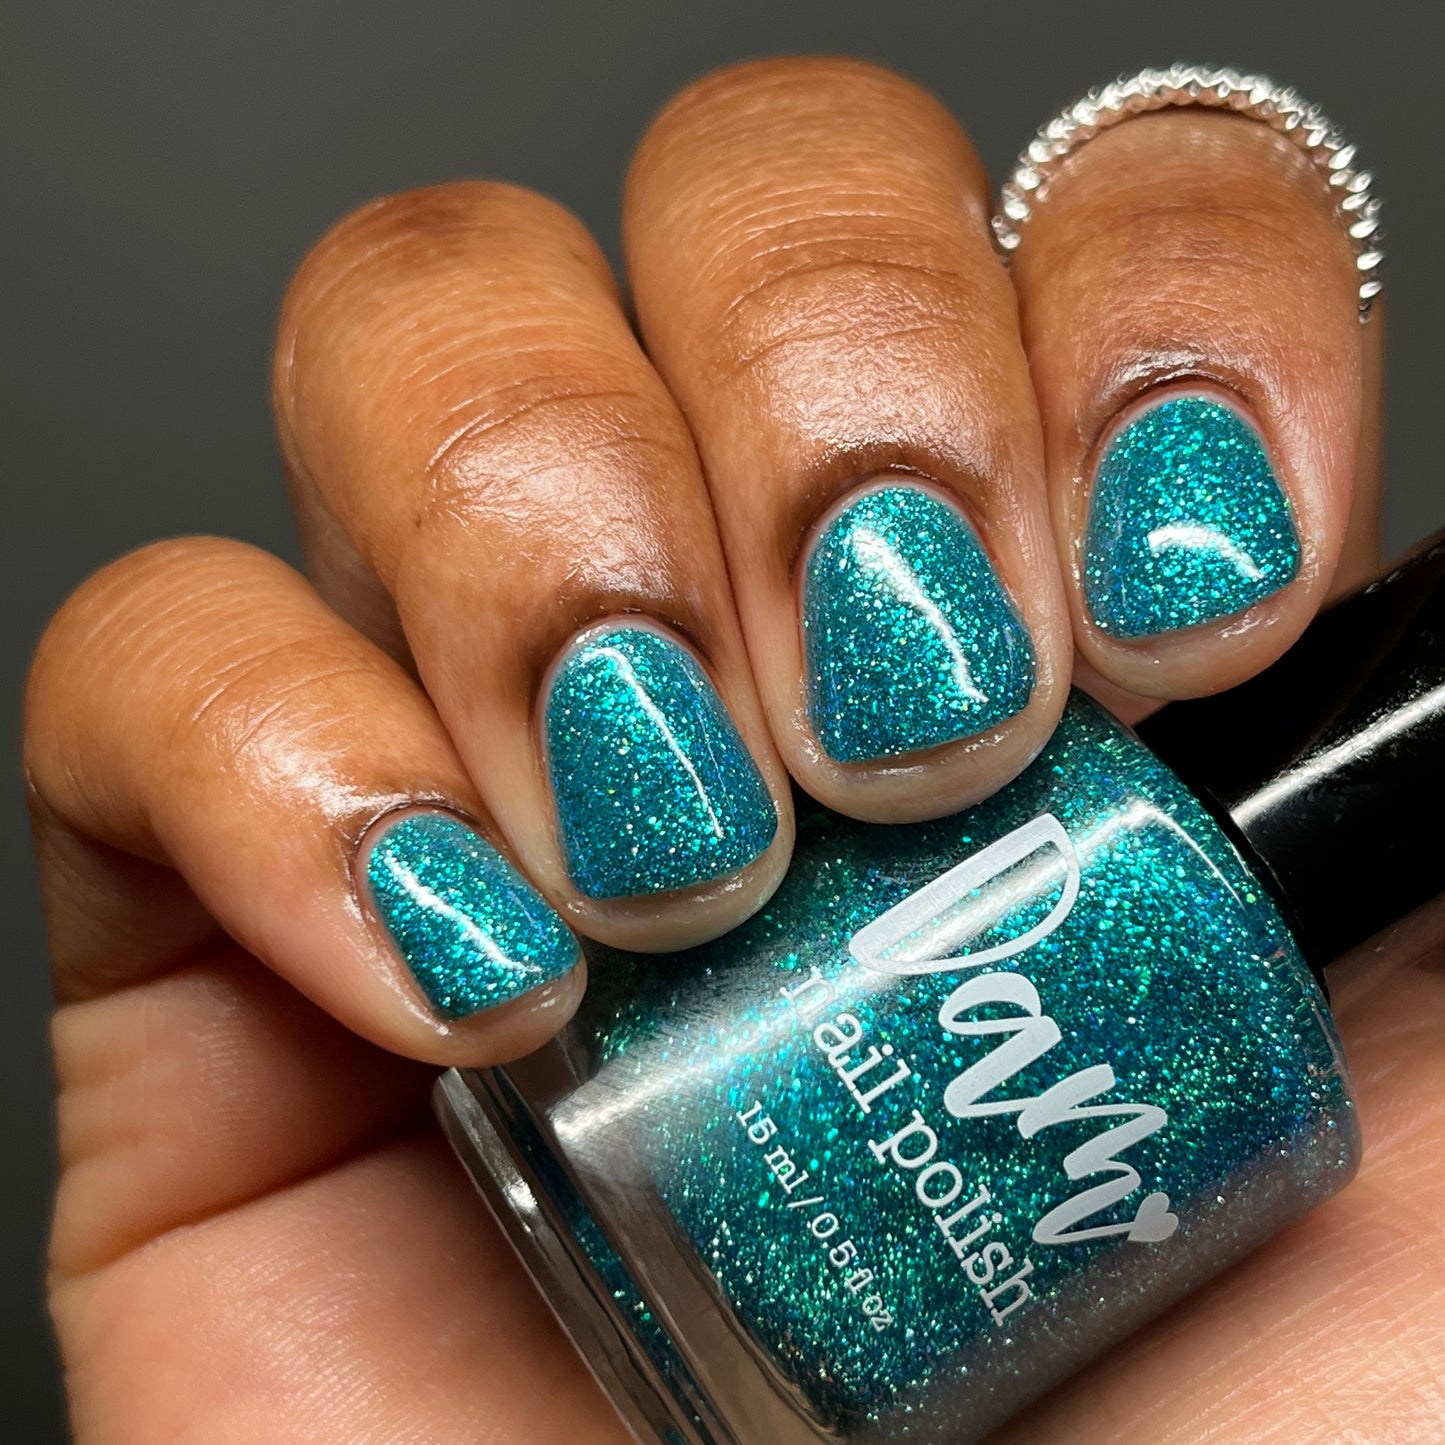 Like Turtley Awesome - Teal Flakie Nail Polish - Limited Edition Pawsitively Polished & Friends Facebook Group Custom